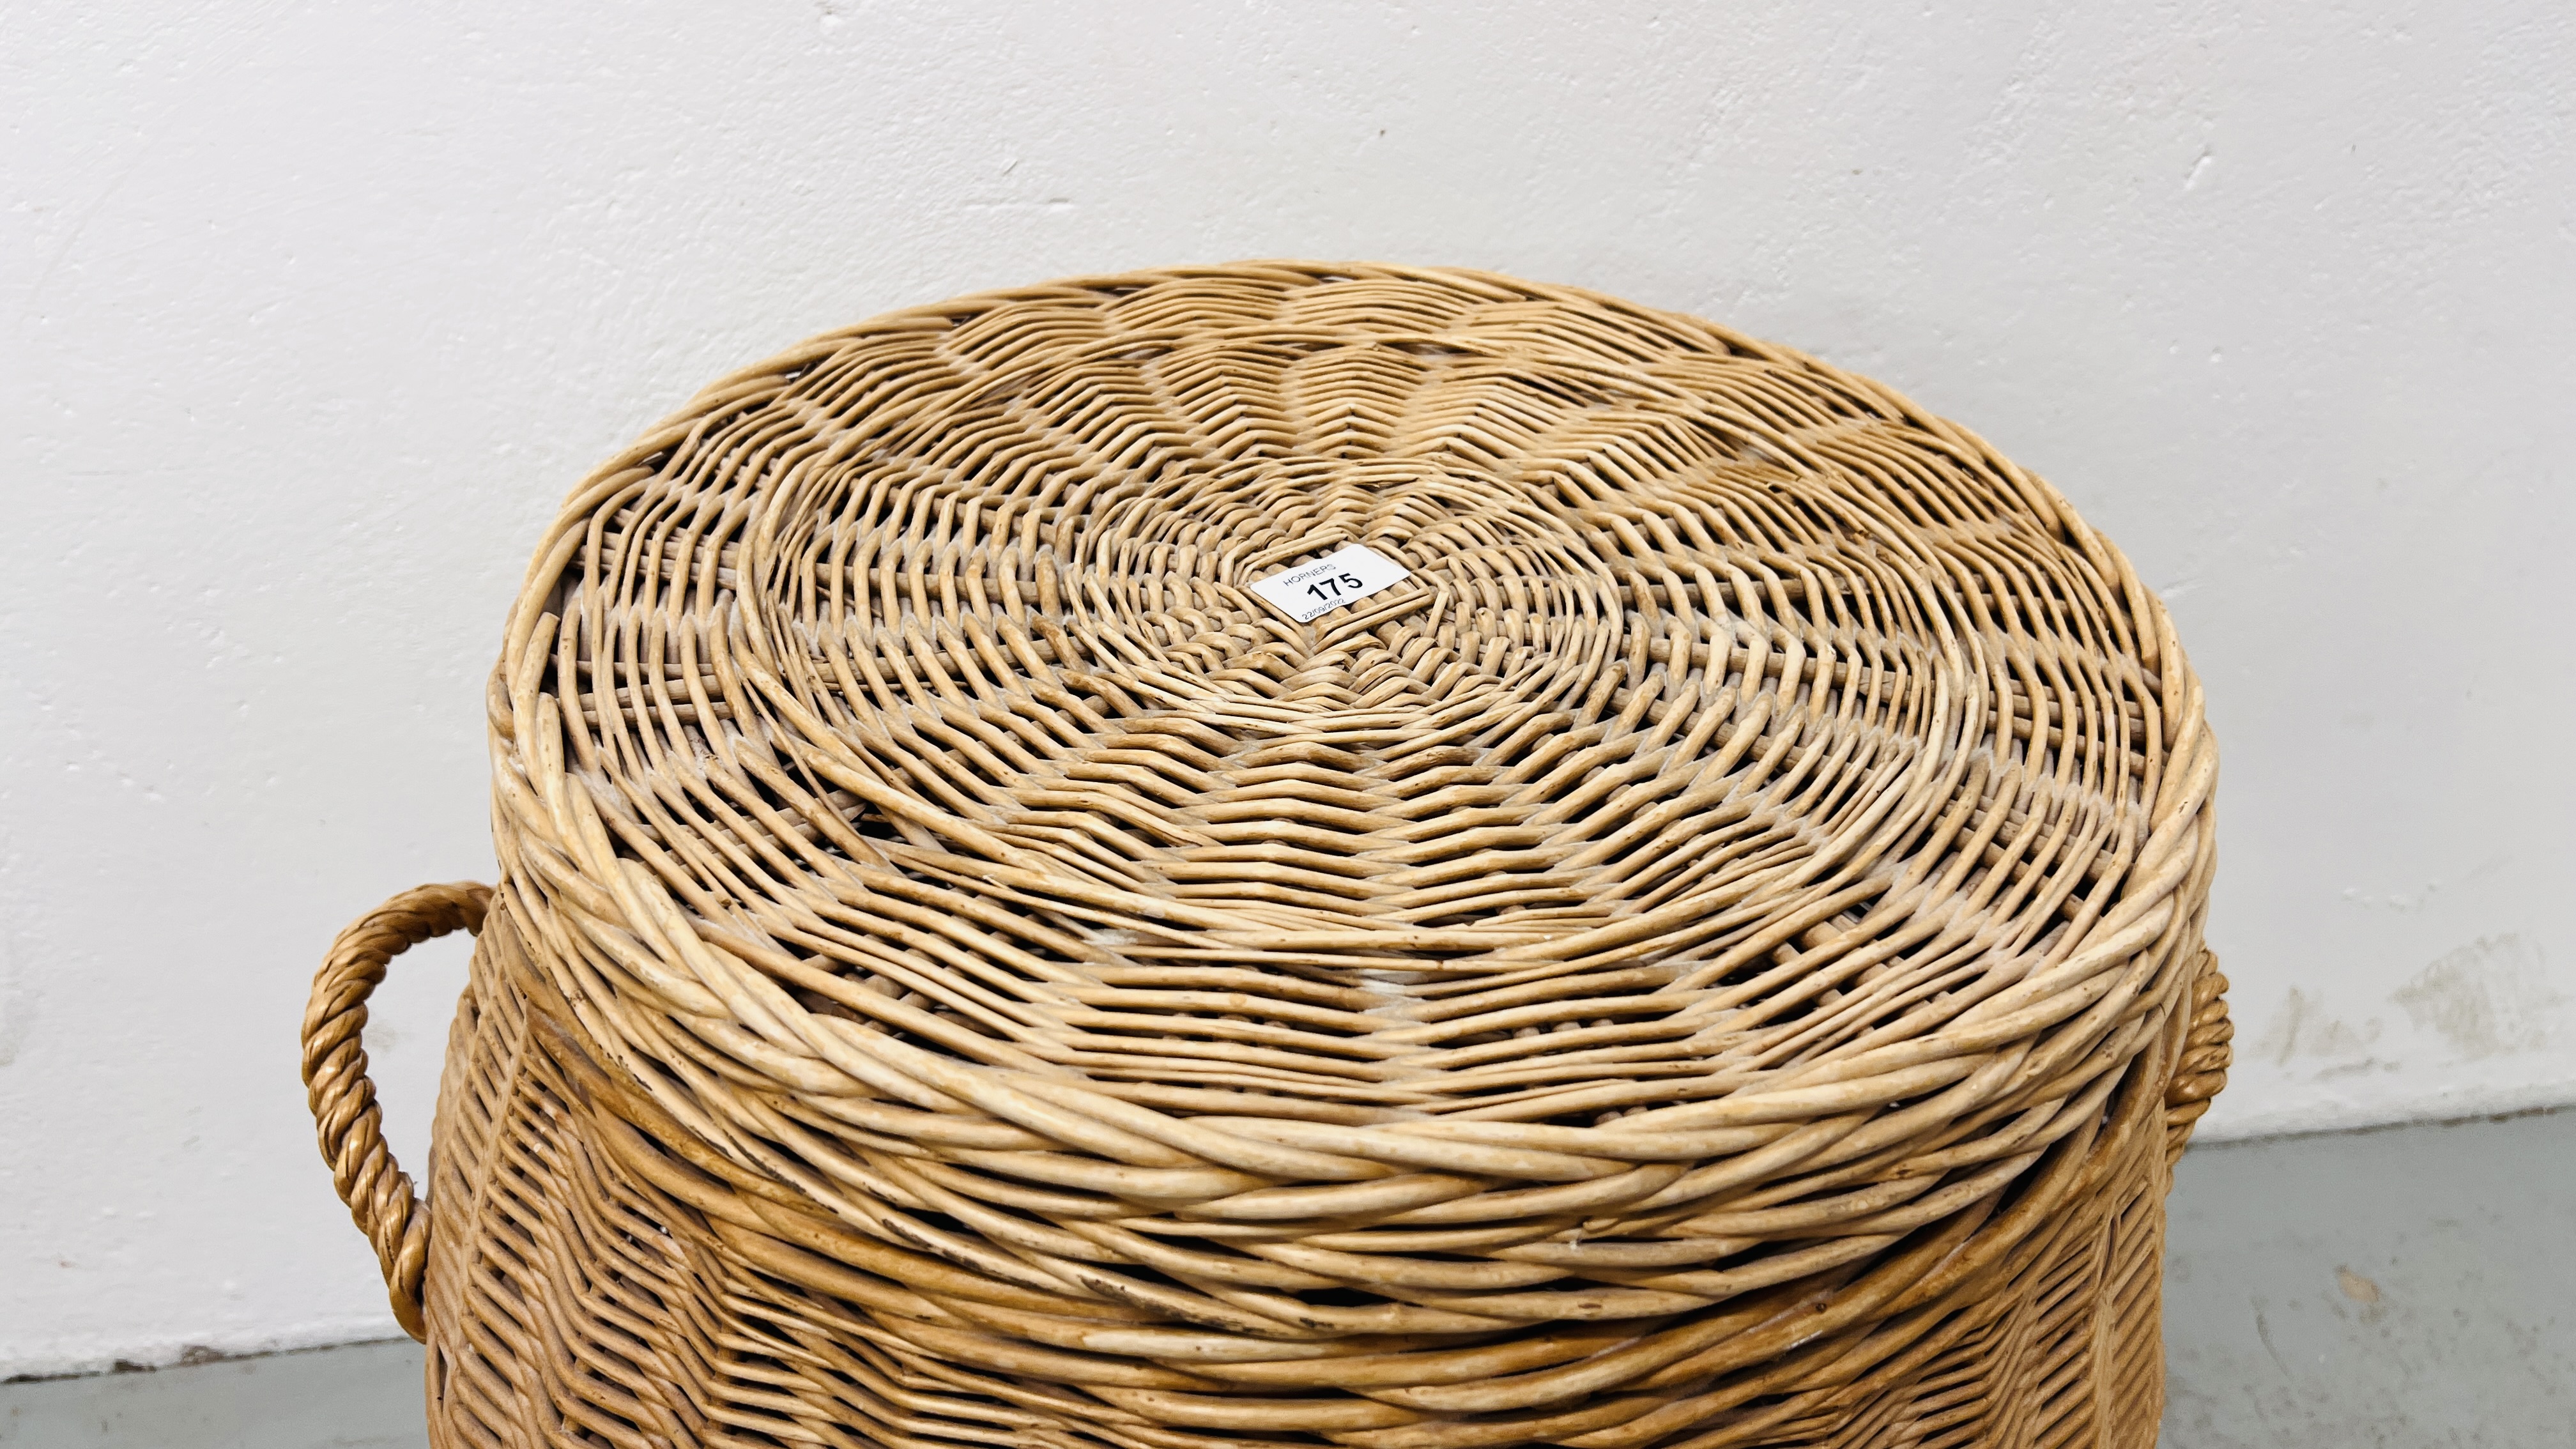 A WICKER LAUNDRY BASKET WITH LID, HEIGHT 60CM. - Image 2 of 5